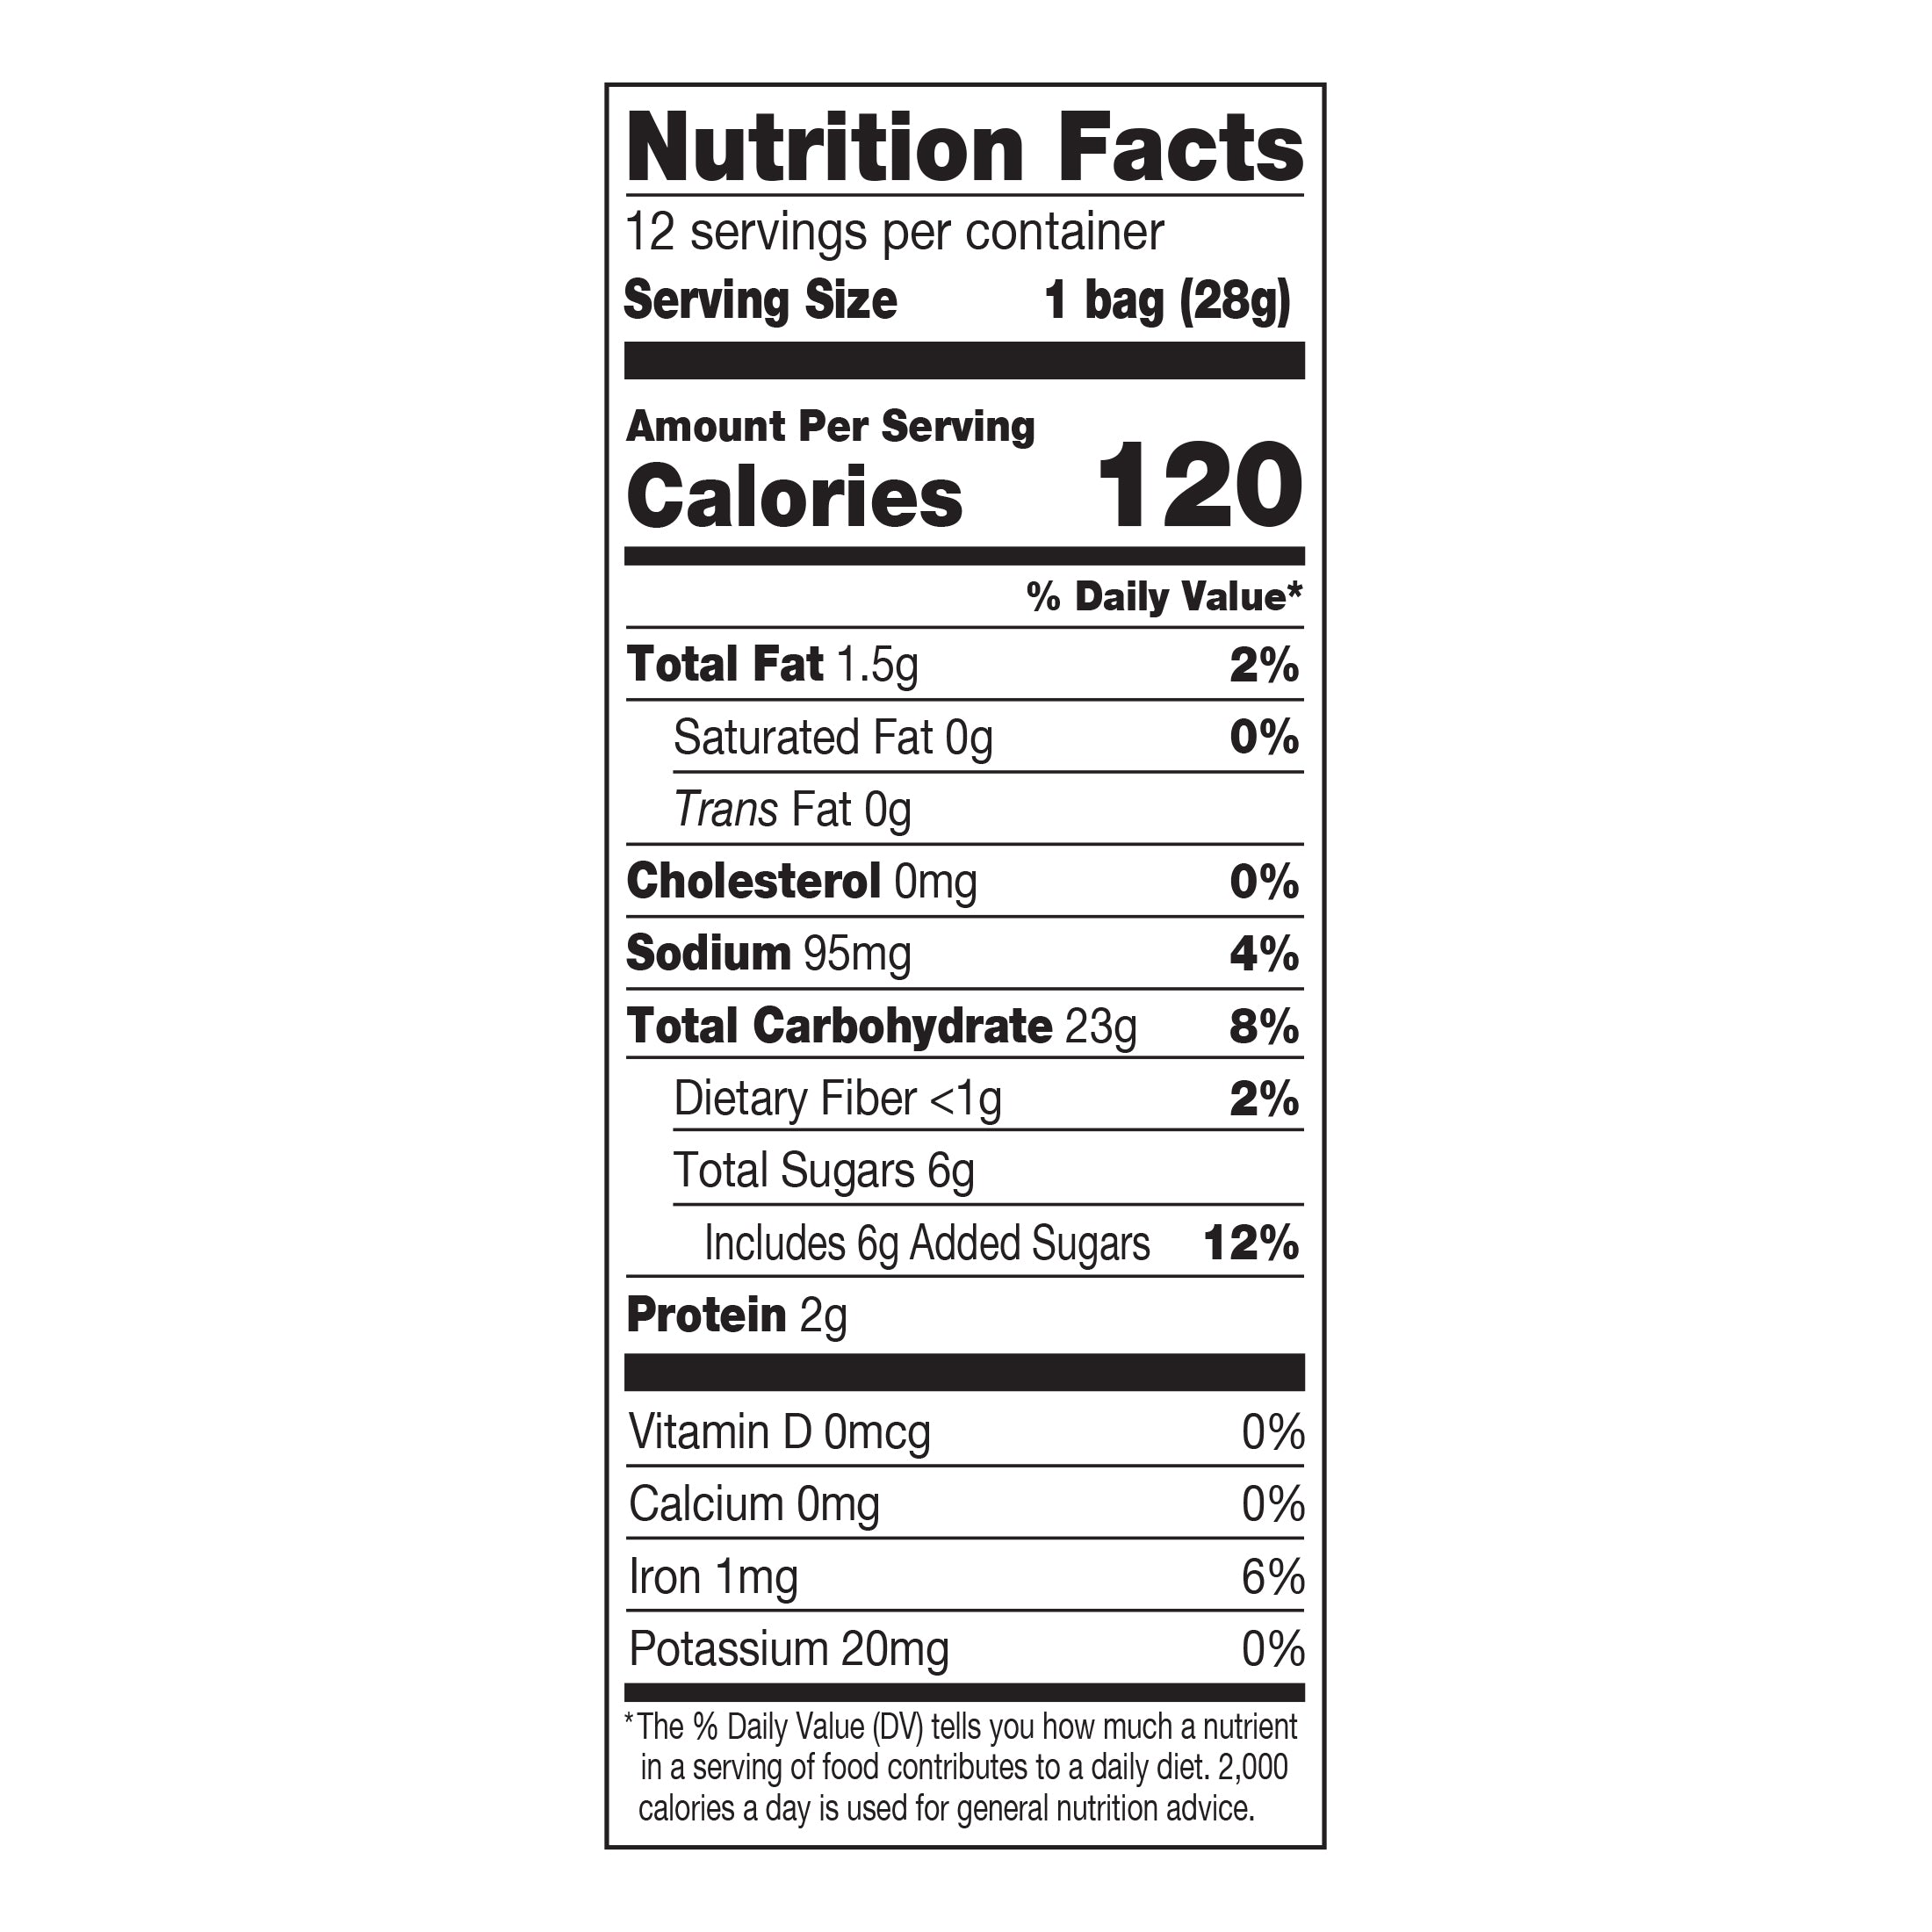 Stauffer's Simply Animals Original Crackers, 12pk 1oz Multipack nutritional facts